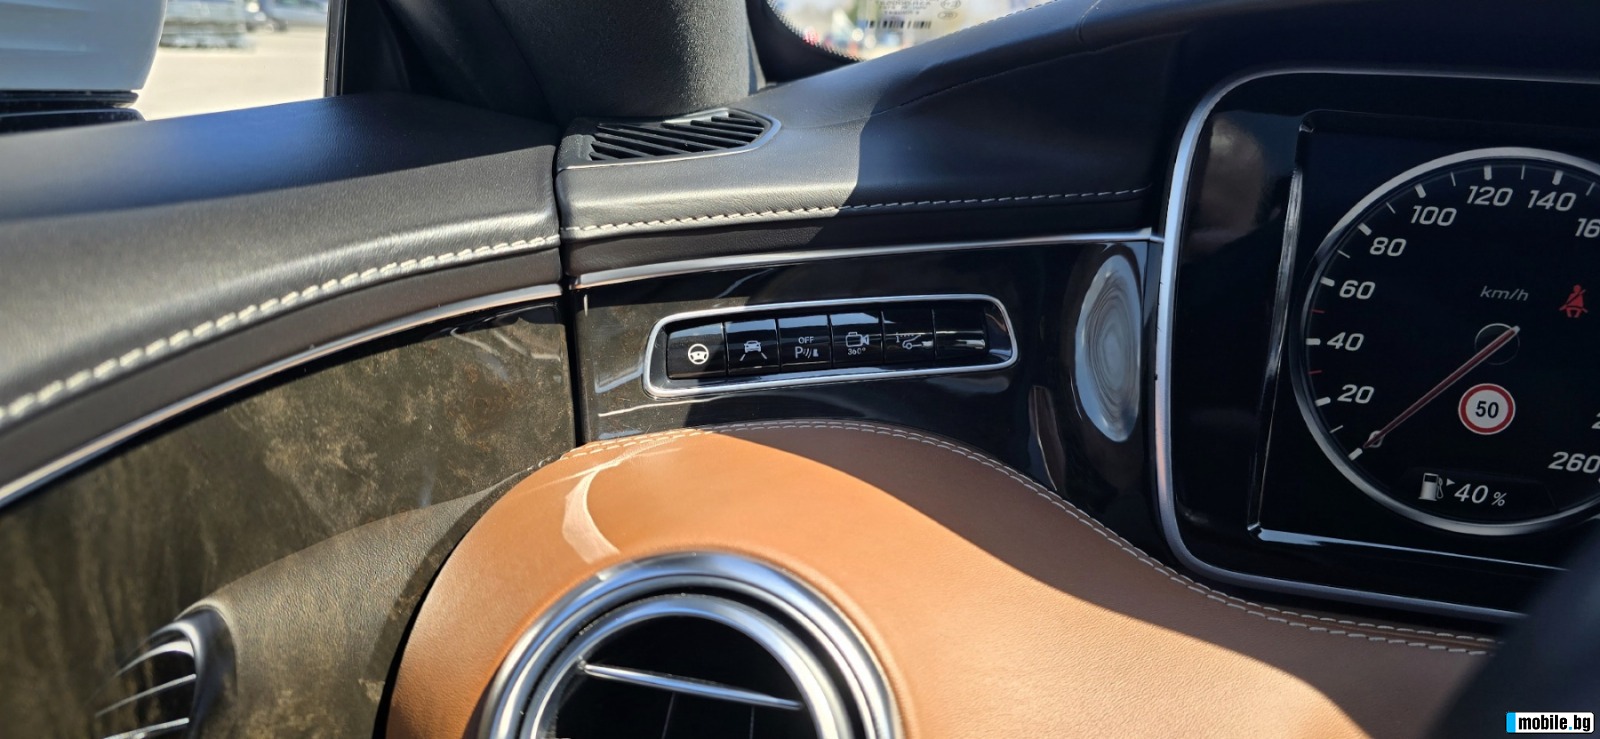 Mercedes-Benz S 500 AMG-4Matic-360-Distronic-HUD-Panorama | Mobile.bg   17